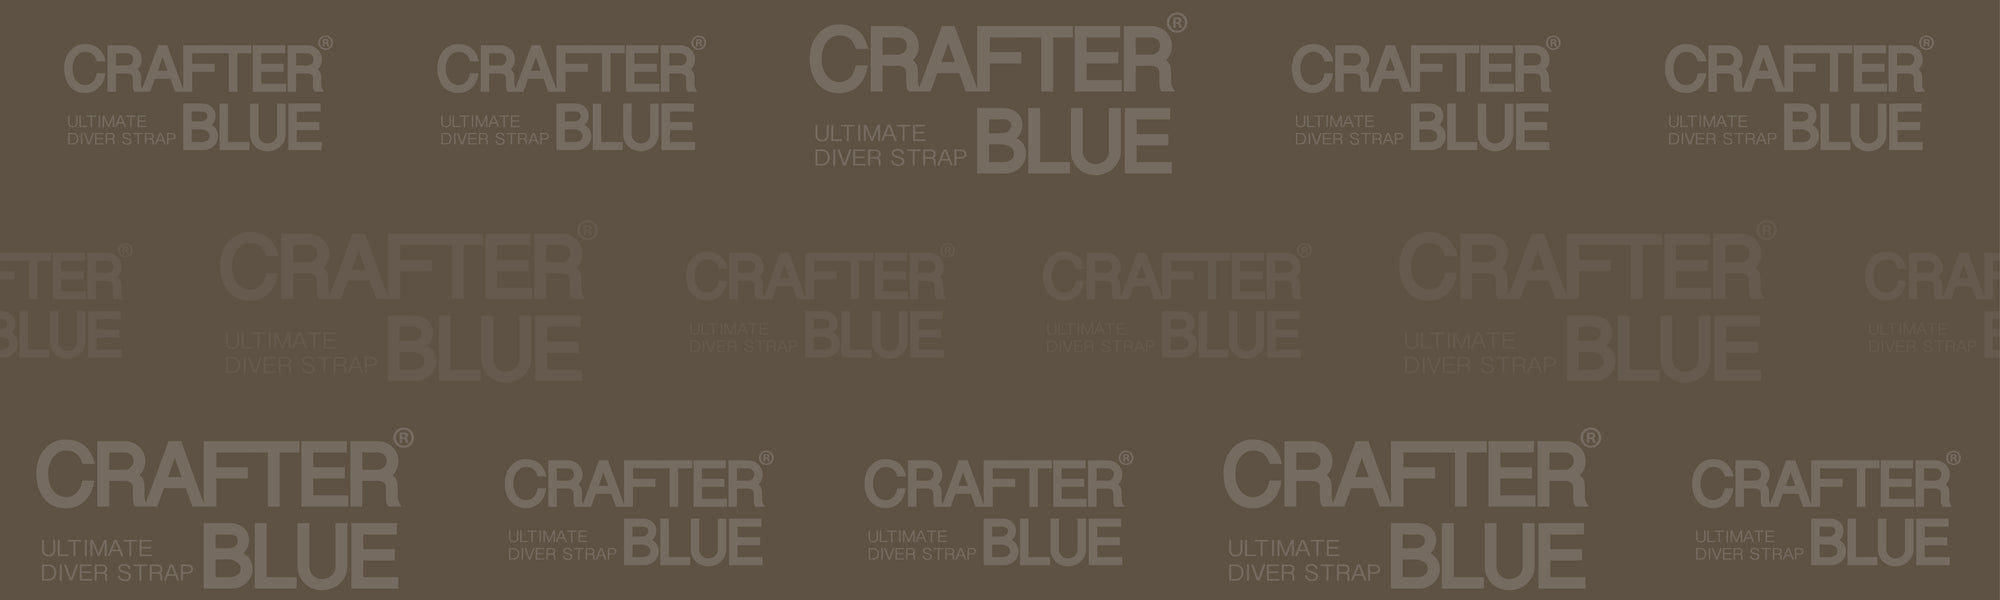 Crafter Blue for Seiko